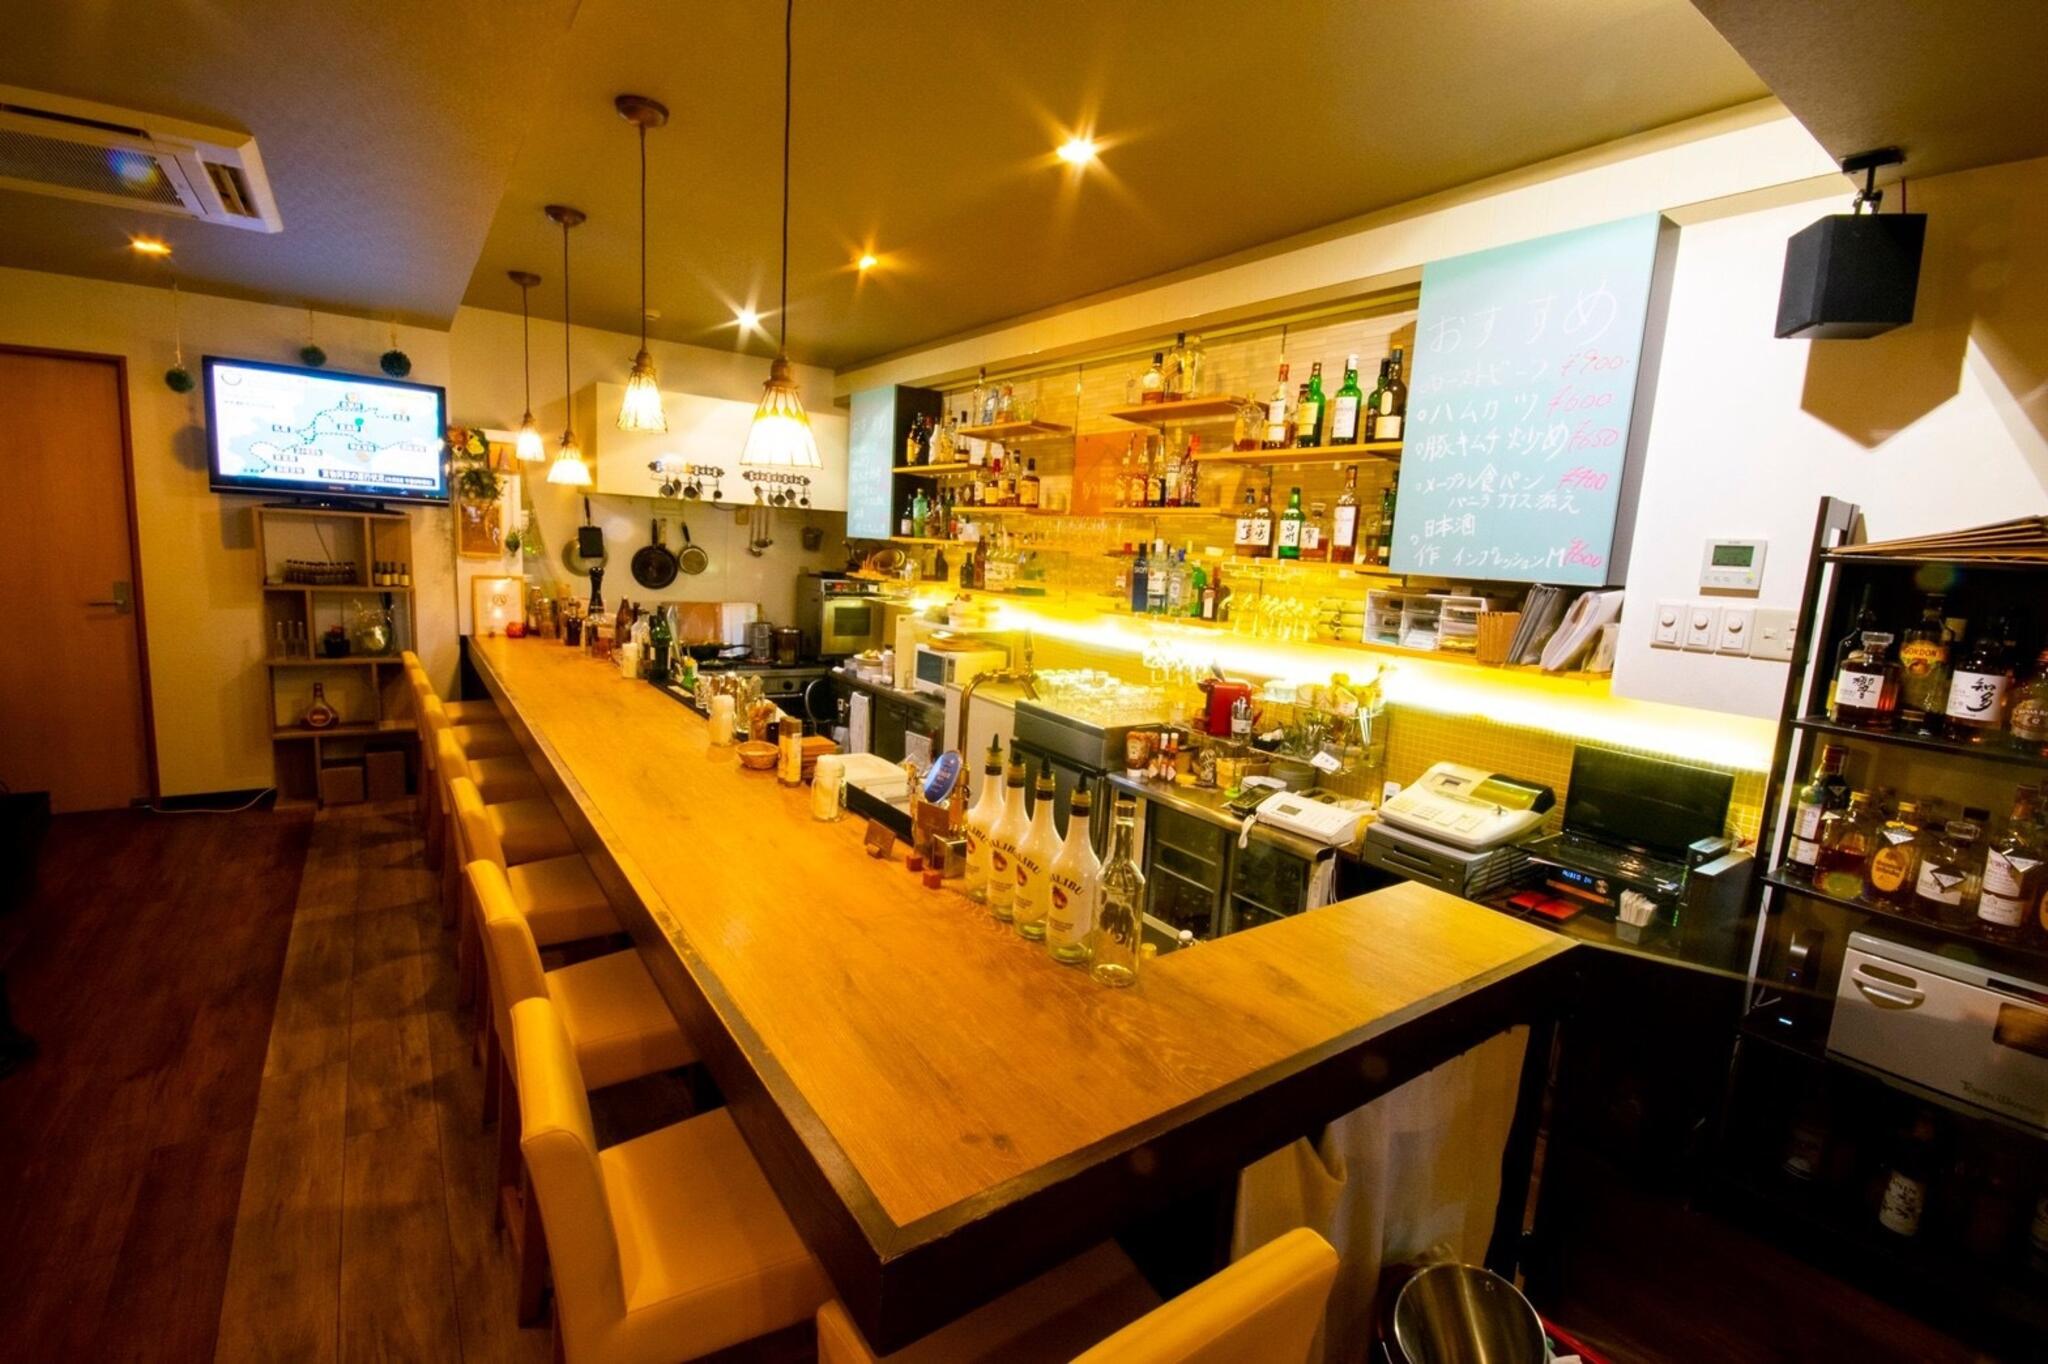 Little kitchen and bar Ty’s Houseの代表写真3